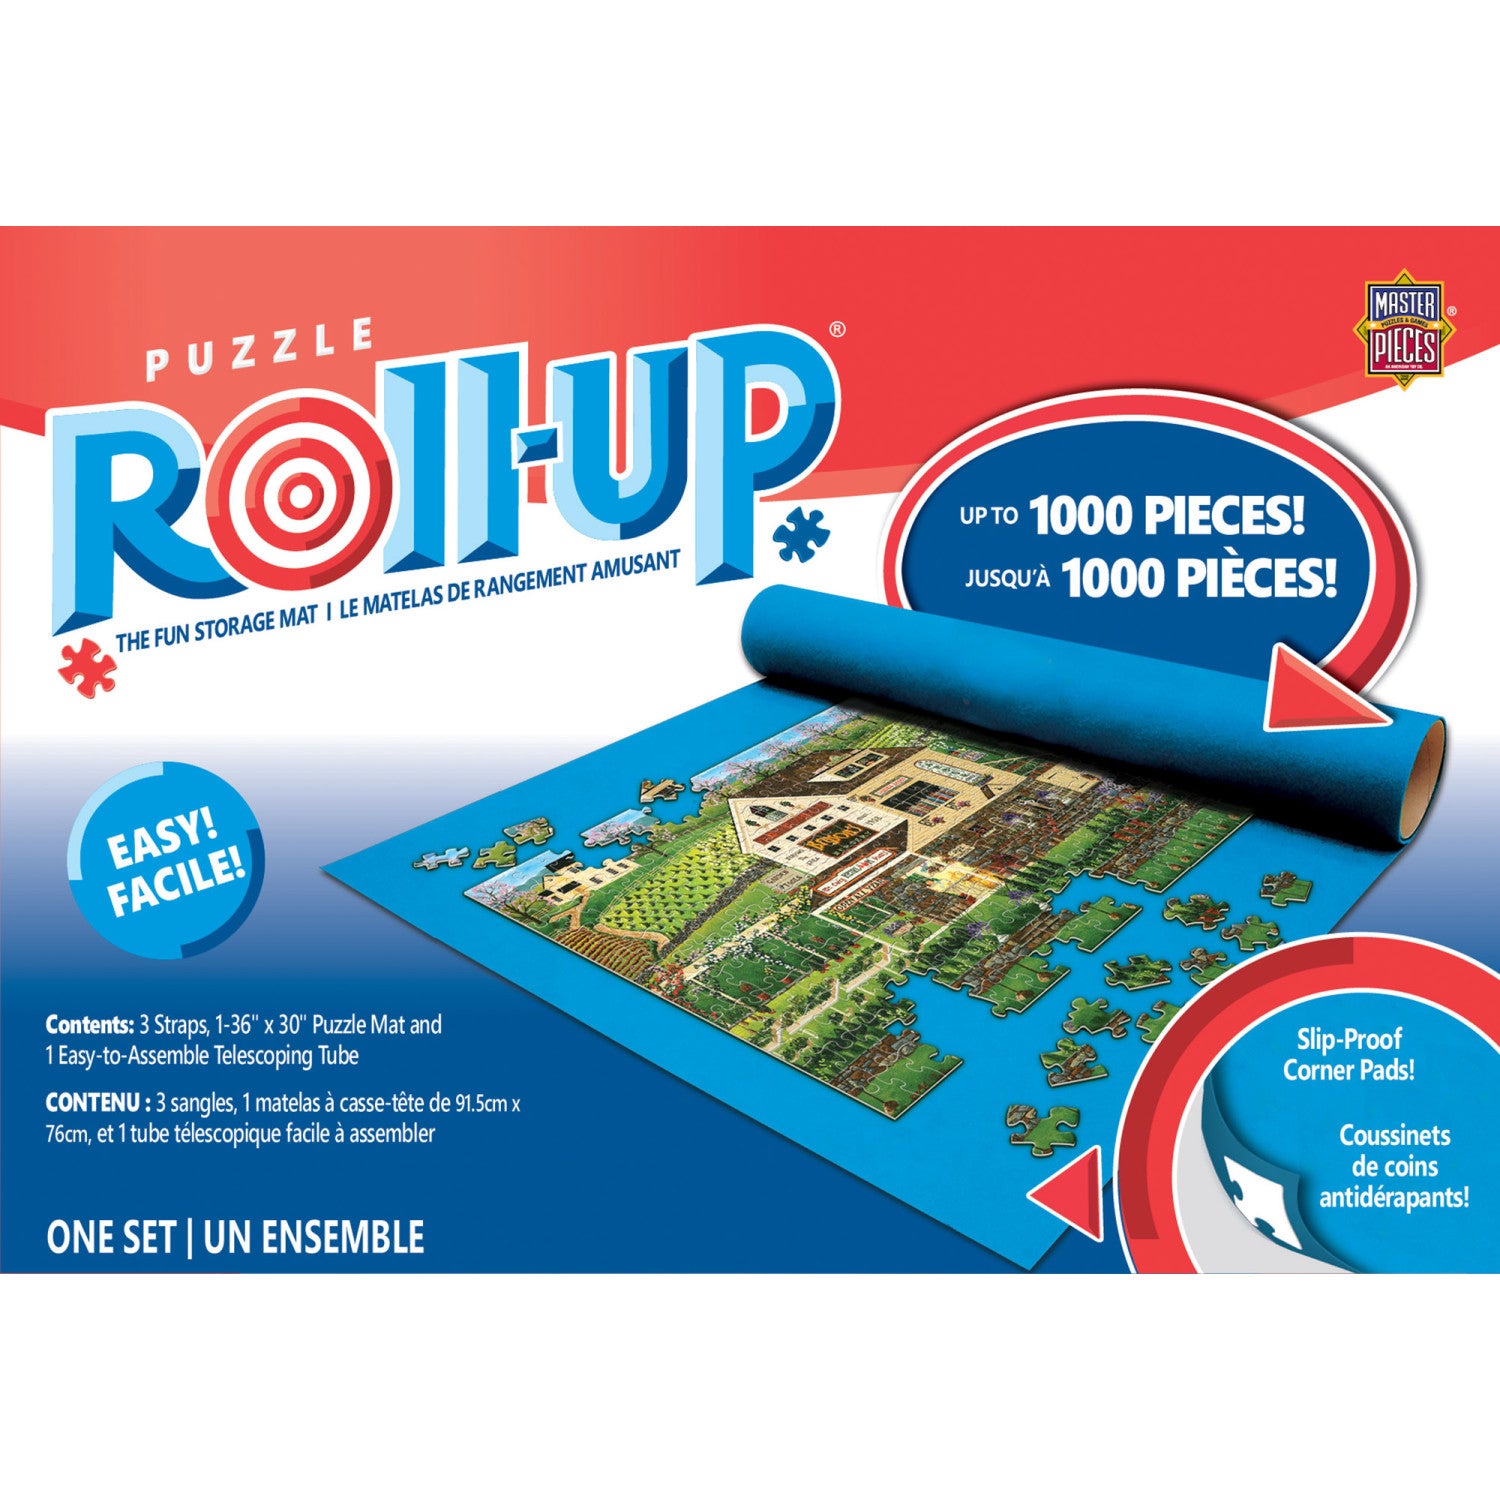 Puzzle Accessories - 36"x30" Puzzle Roll Up